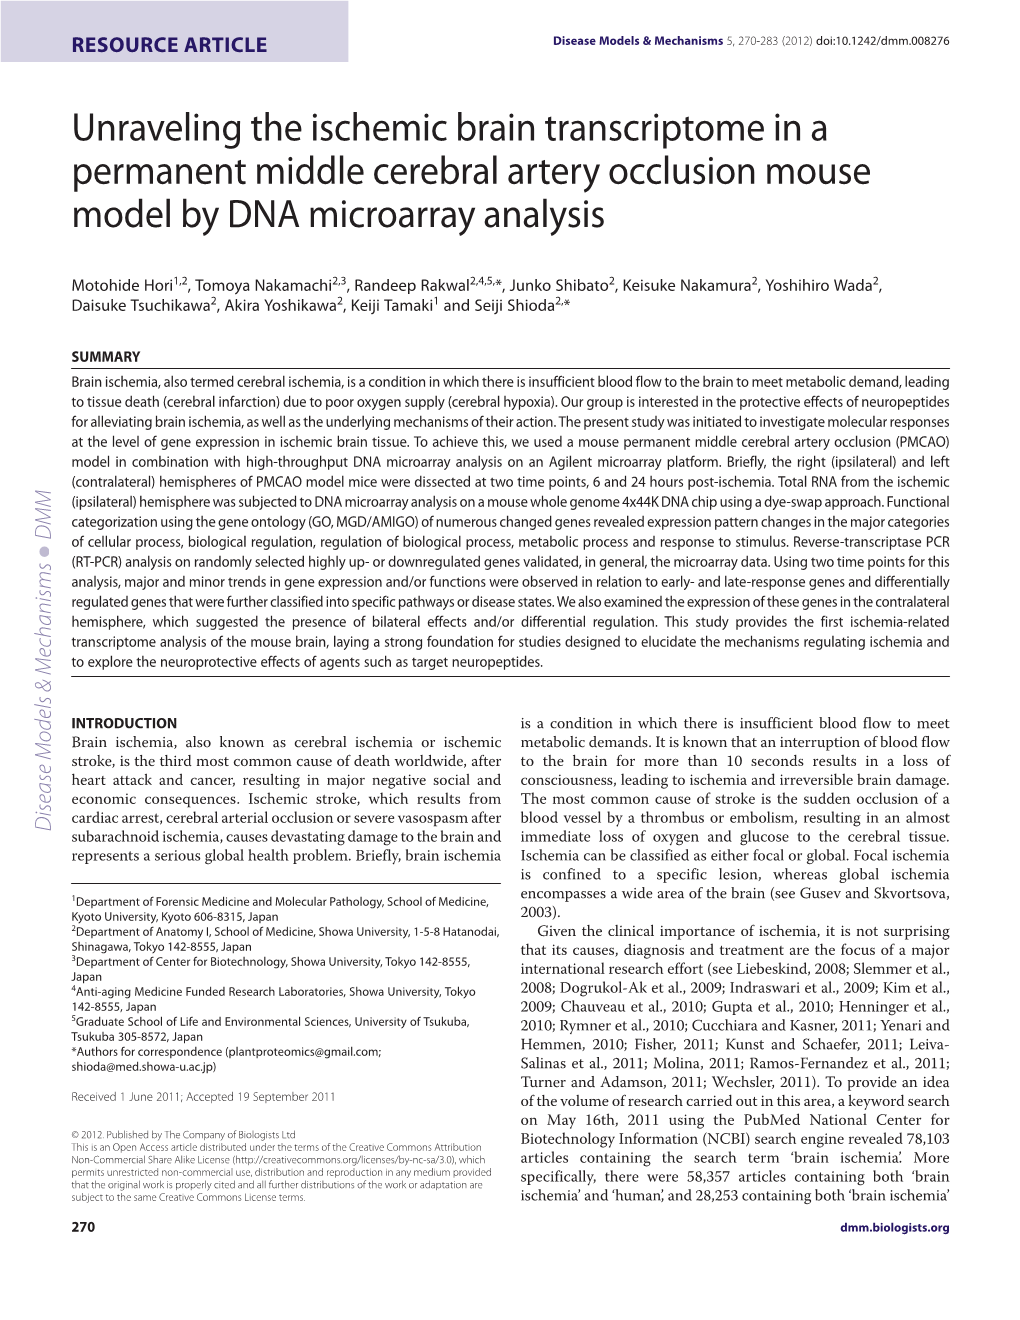 Unraveling the Ischemic Brain Transcriptome in a Permanent Middle Cerebral Artery Occlusion Mouse Model by DNA Microarray Analysis